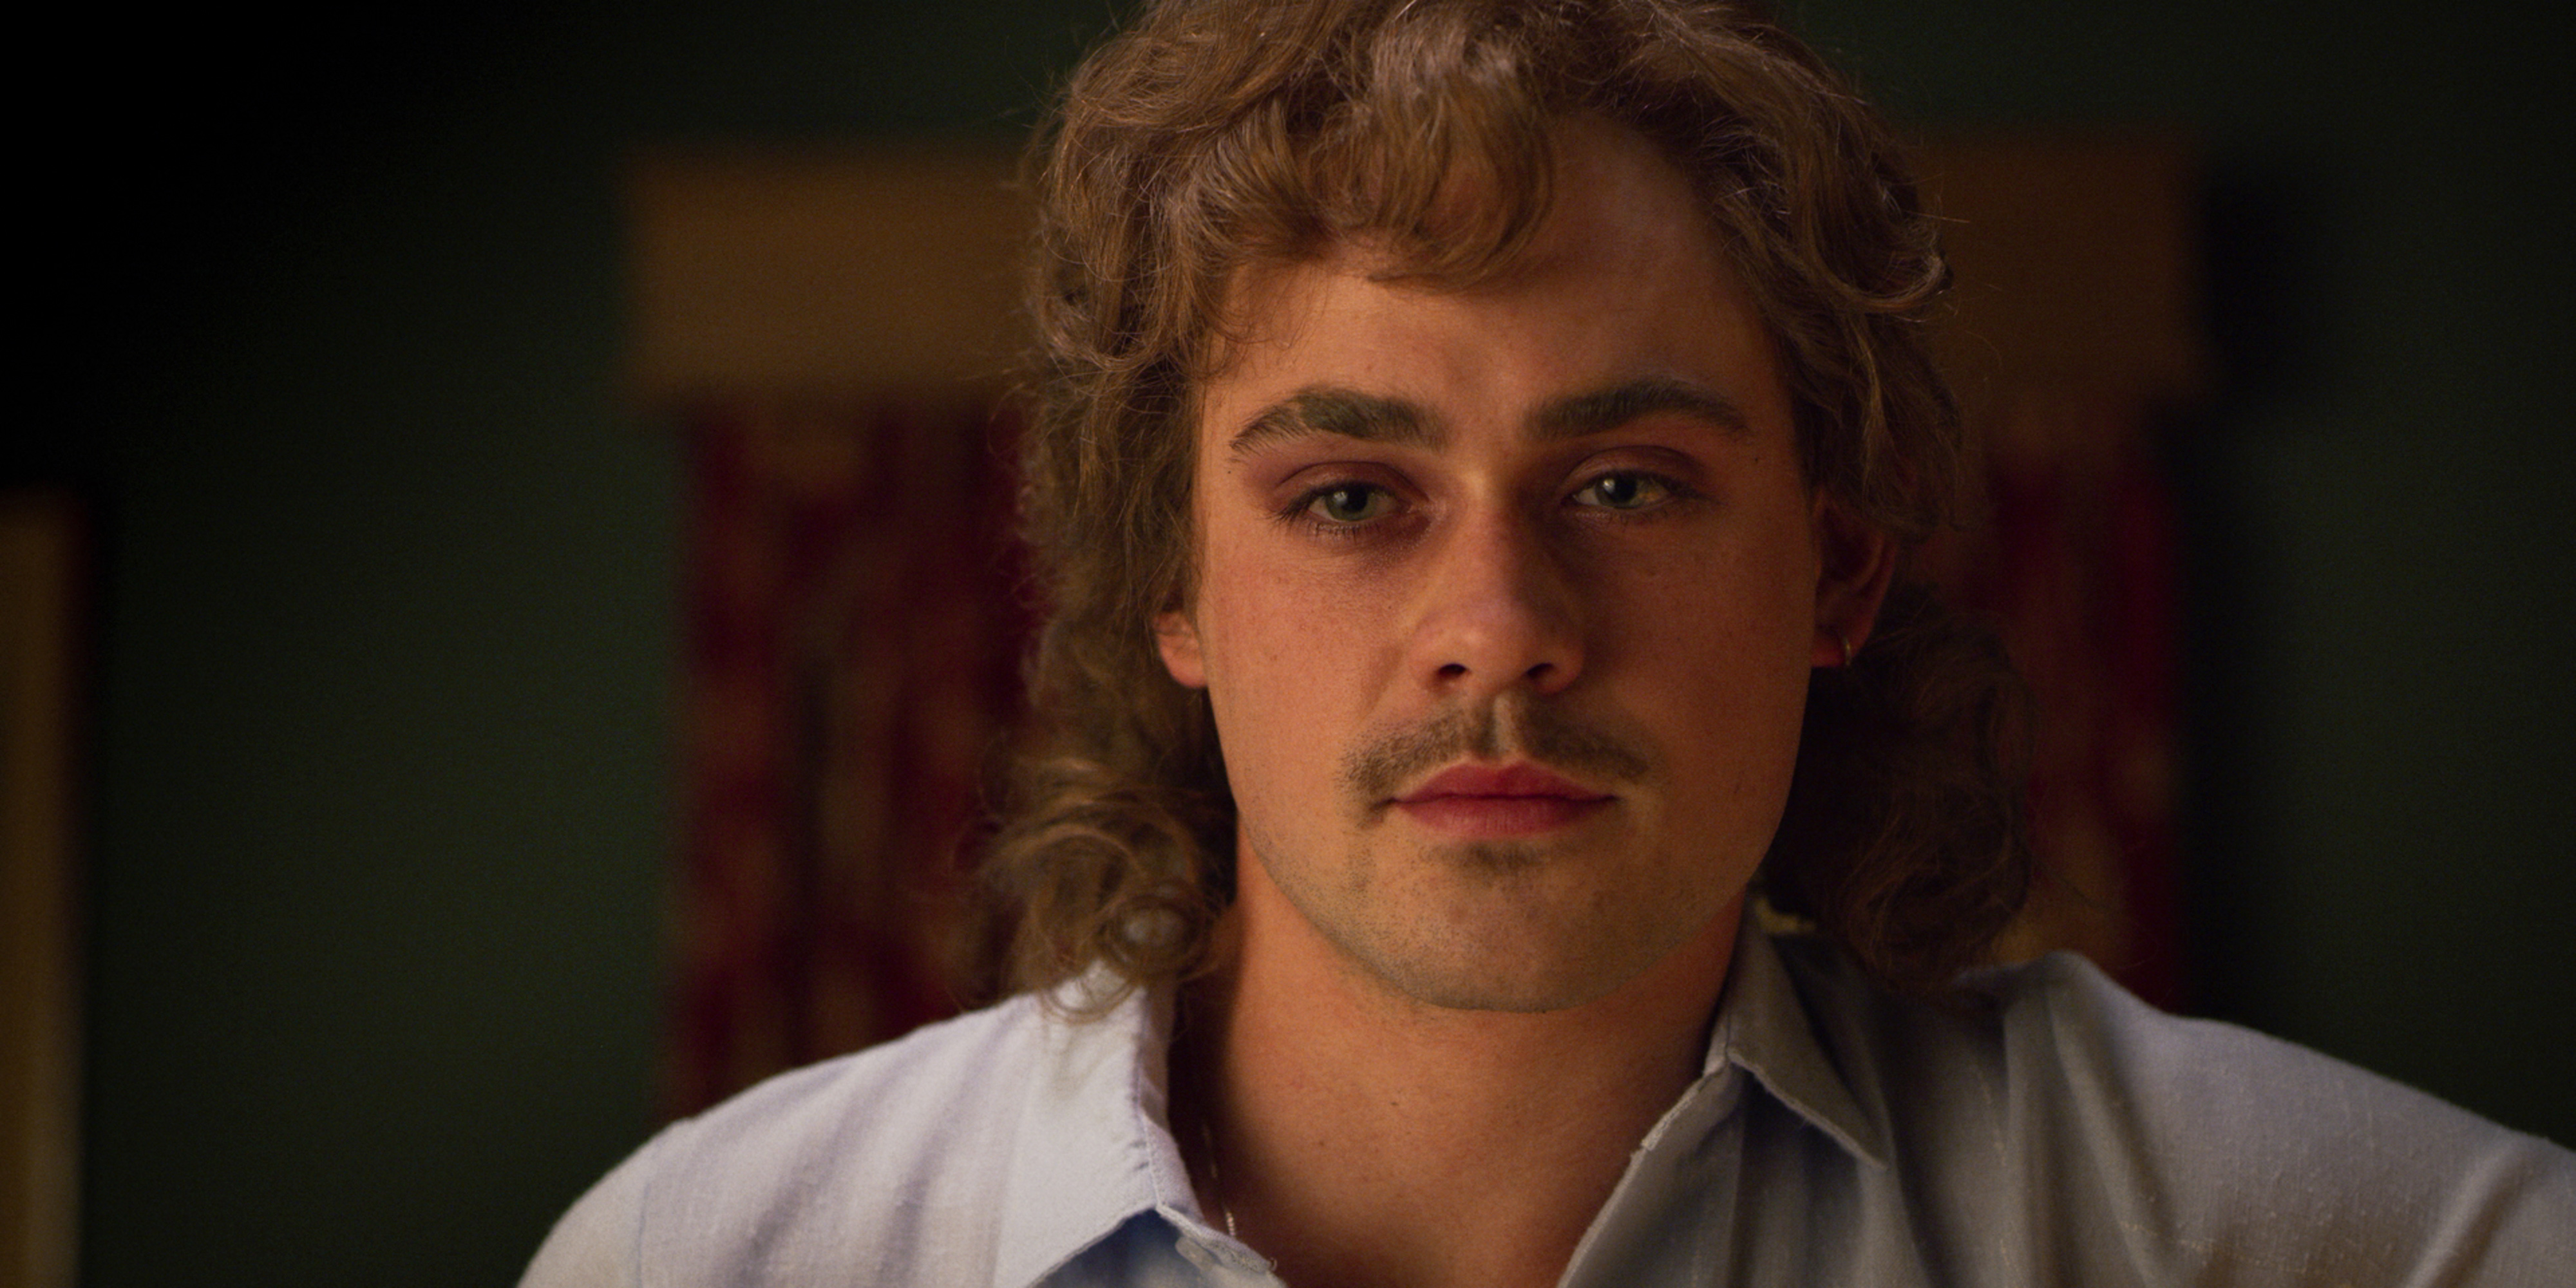 Dacre Montgomery as Billy Hargroves in a production still from 'Stranger Things' Season 3.